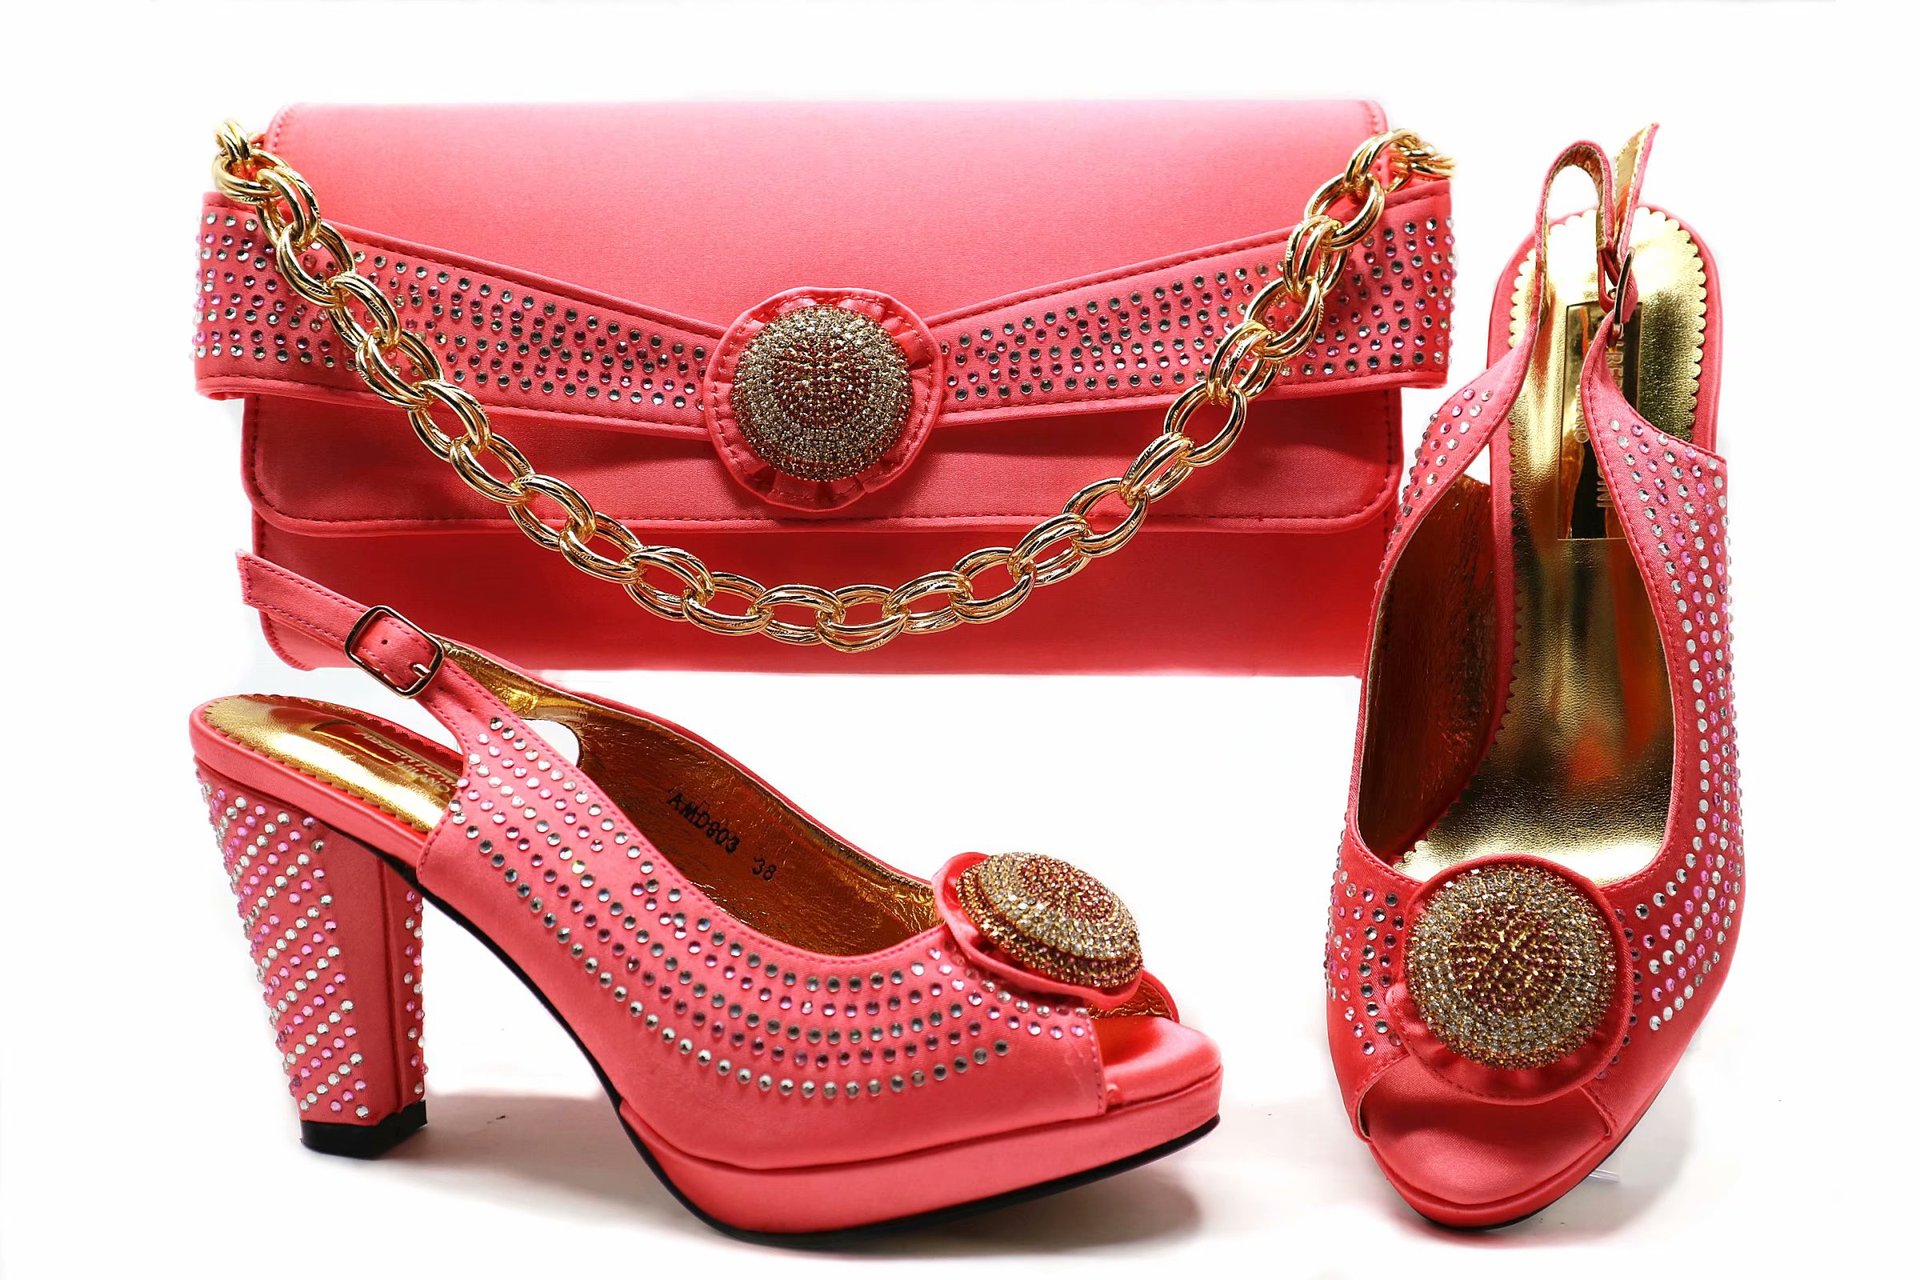 Beautiful Peep Toes Shoes With Handbag Autumn New Arrivals